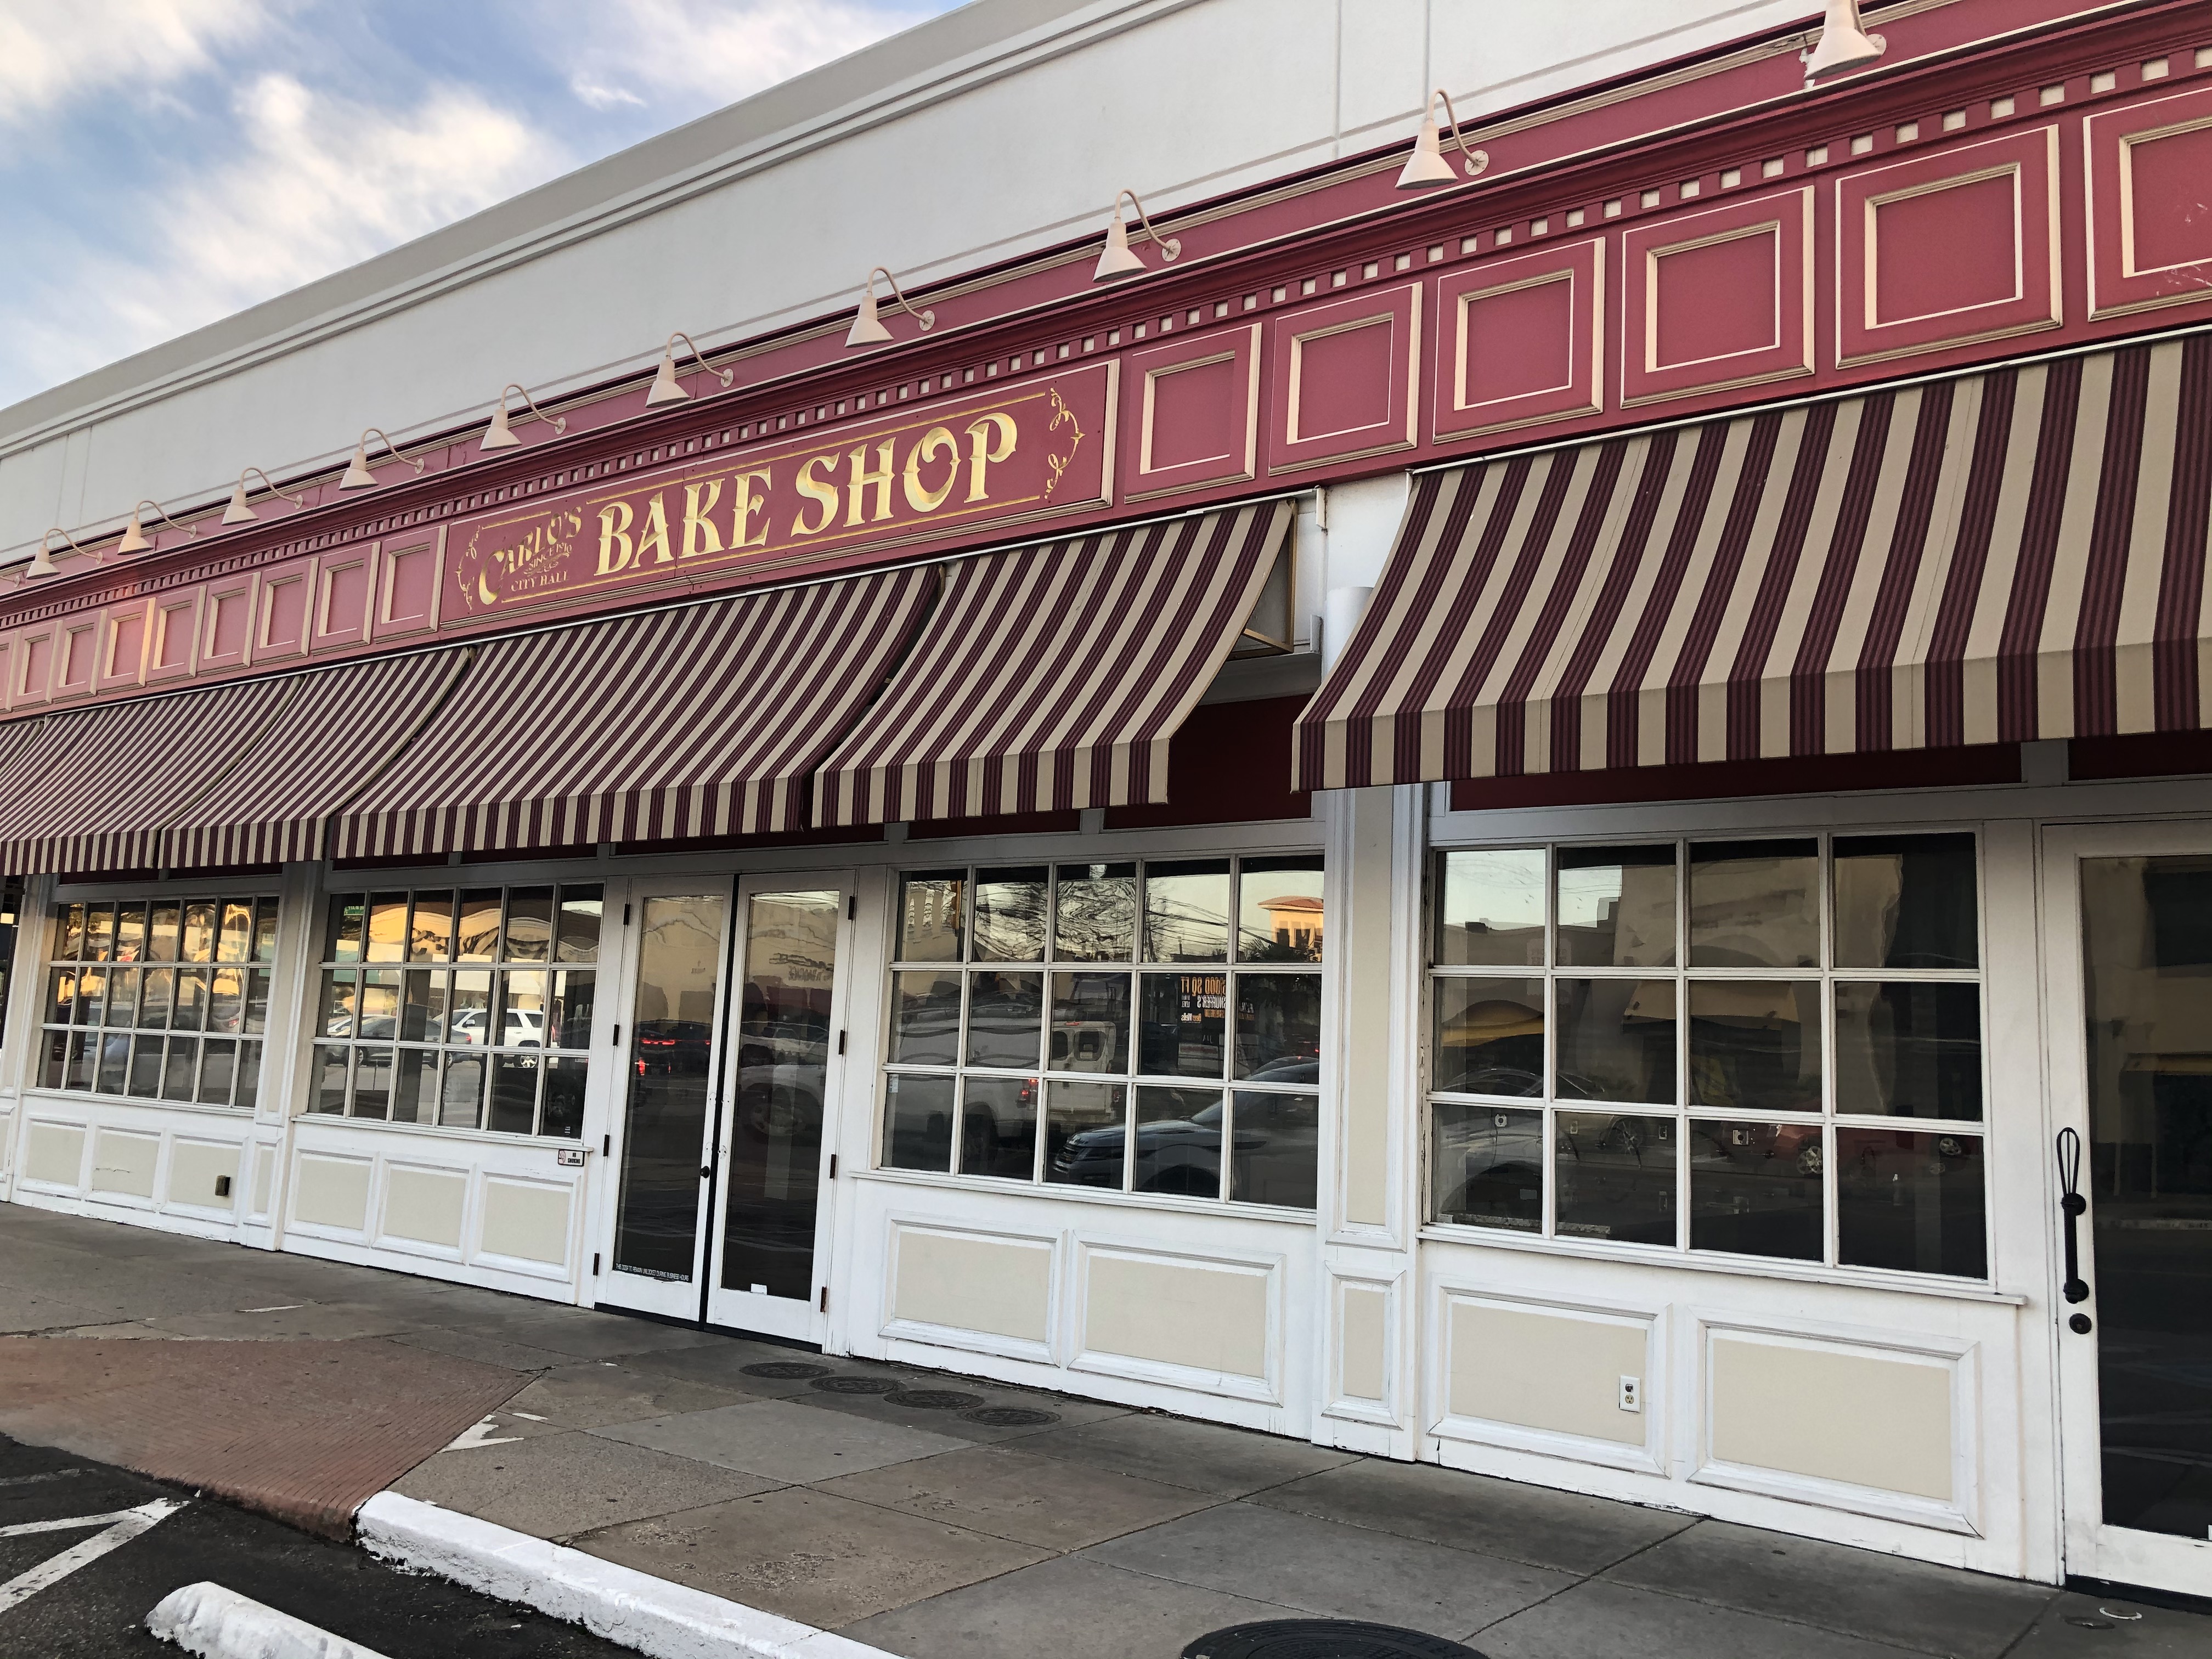 Buddies restaurant from cake boss | Cake boss, Carlos bakery, Party cakes